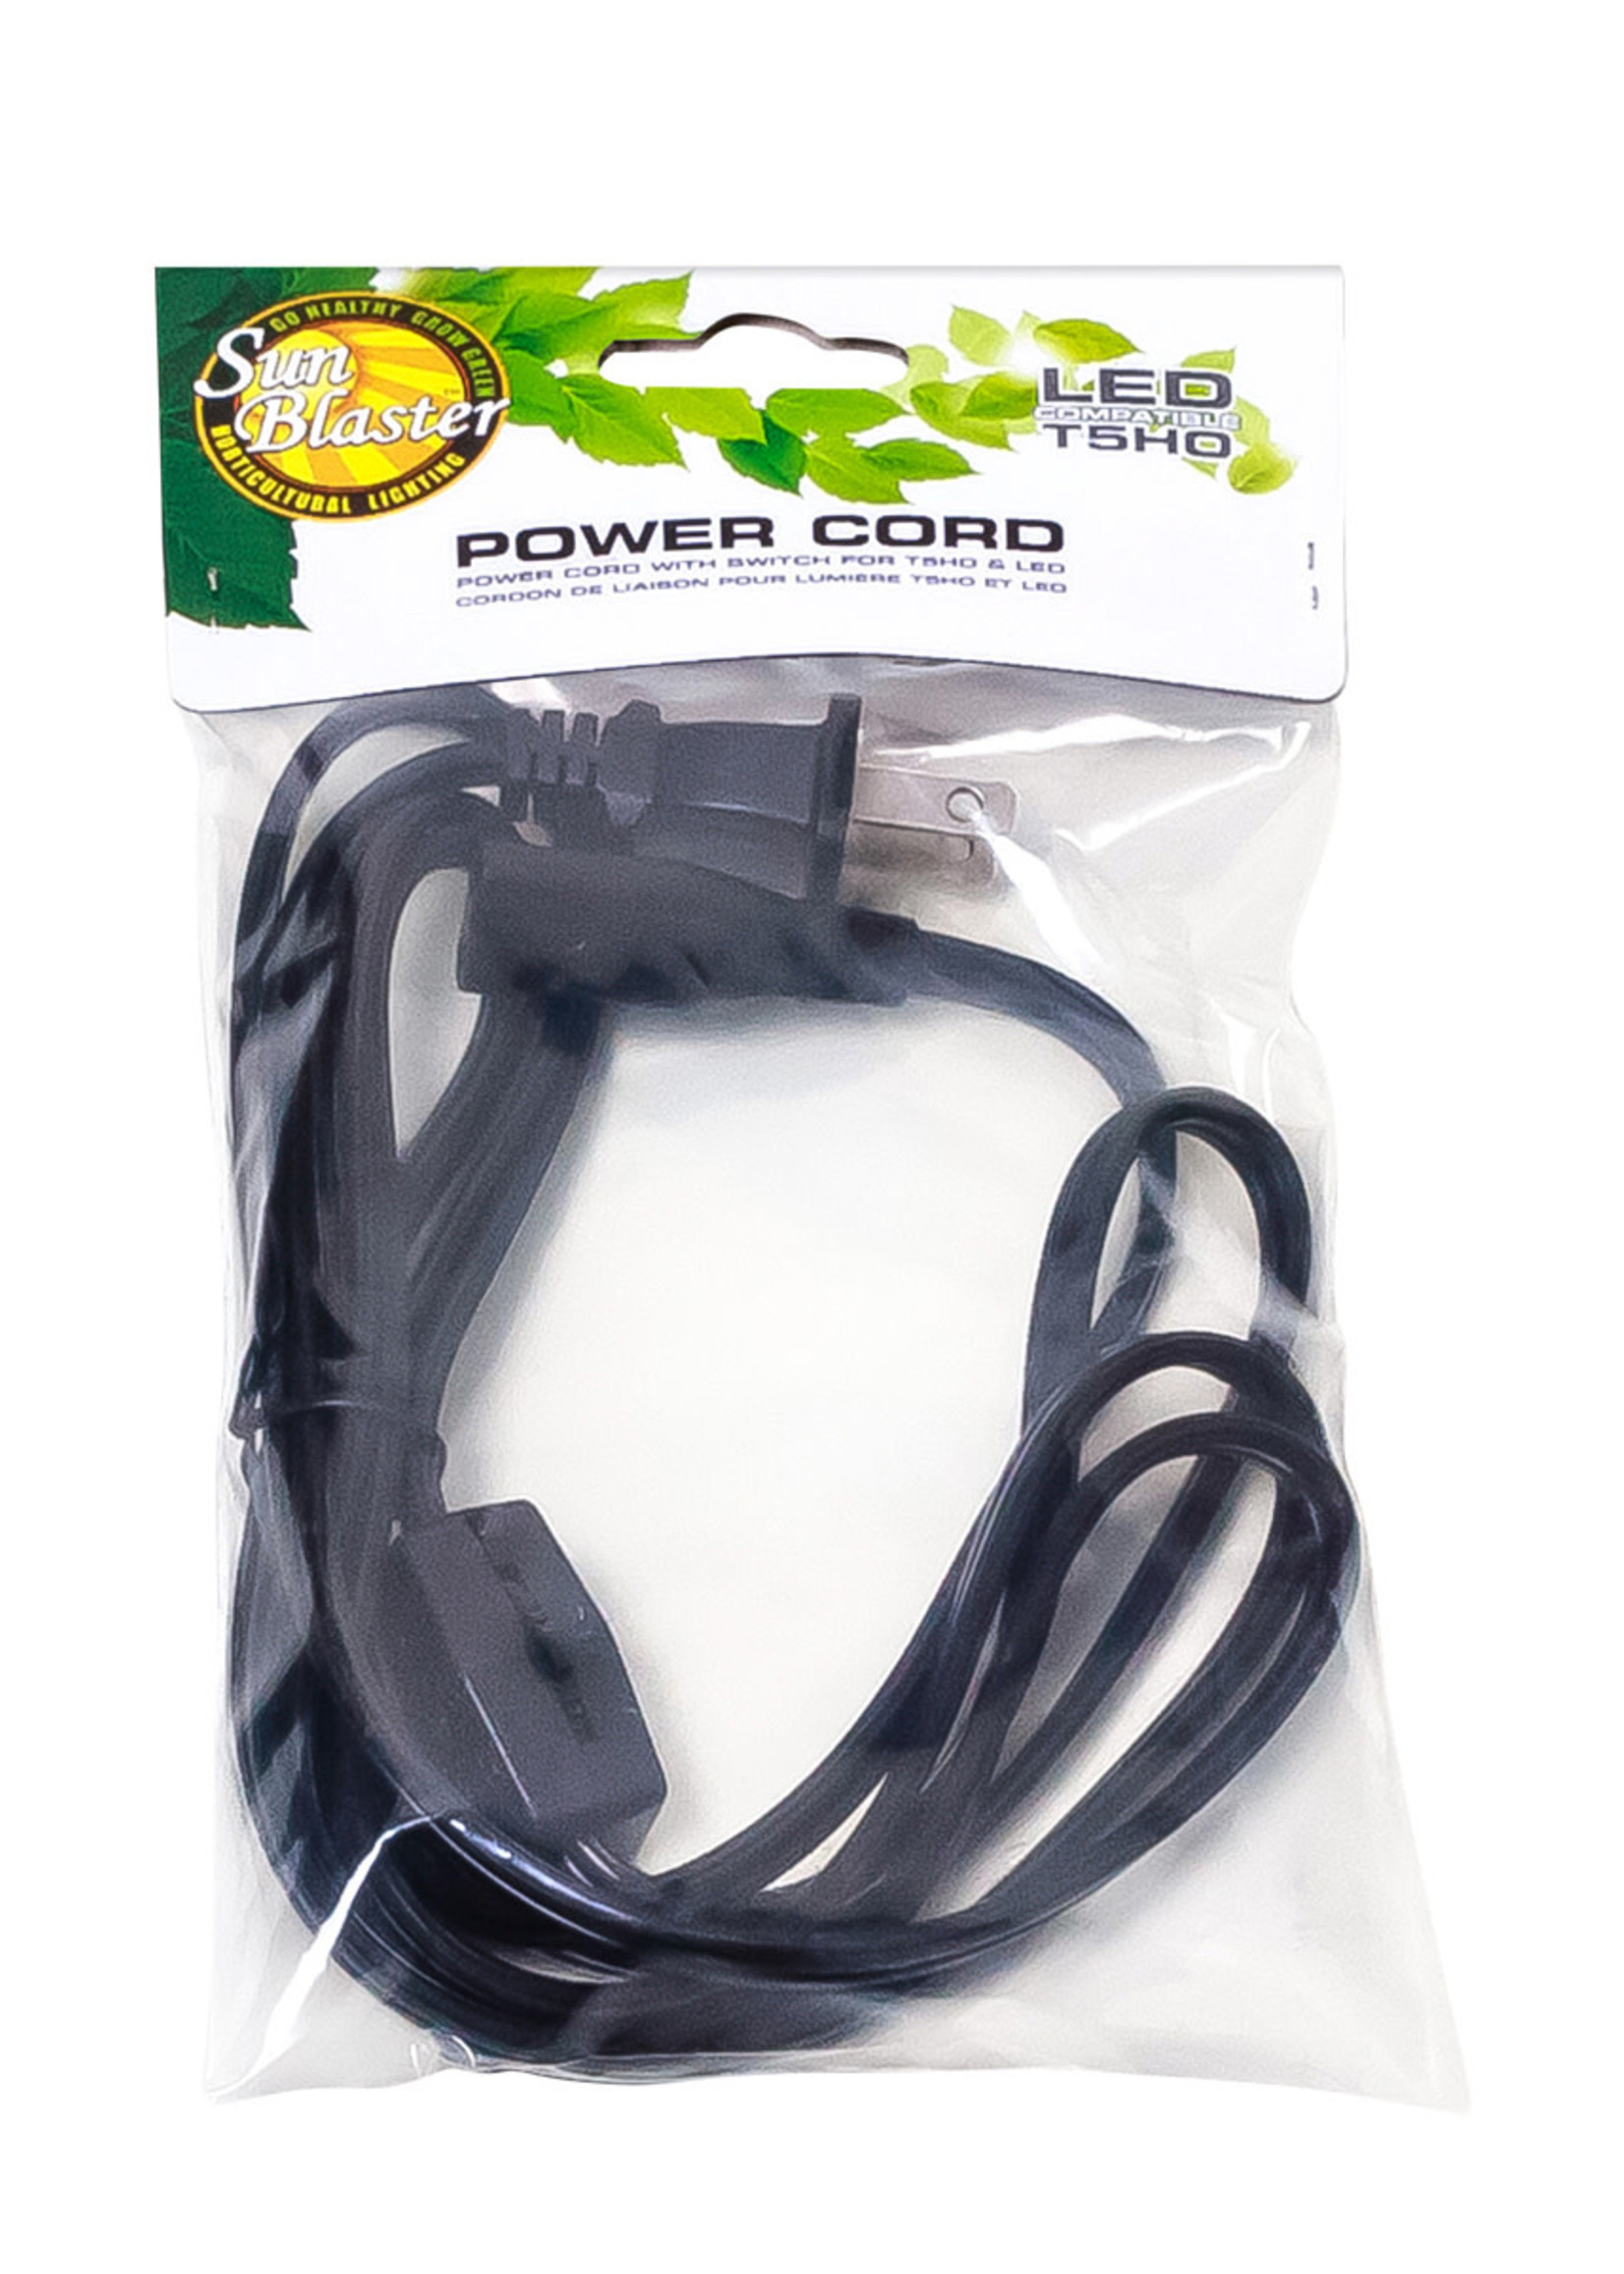 Sunblaster 6 ft Power Cord with ON/OFF Switch